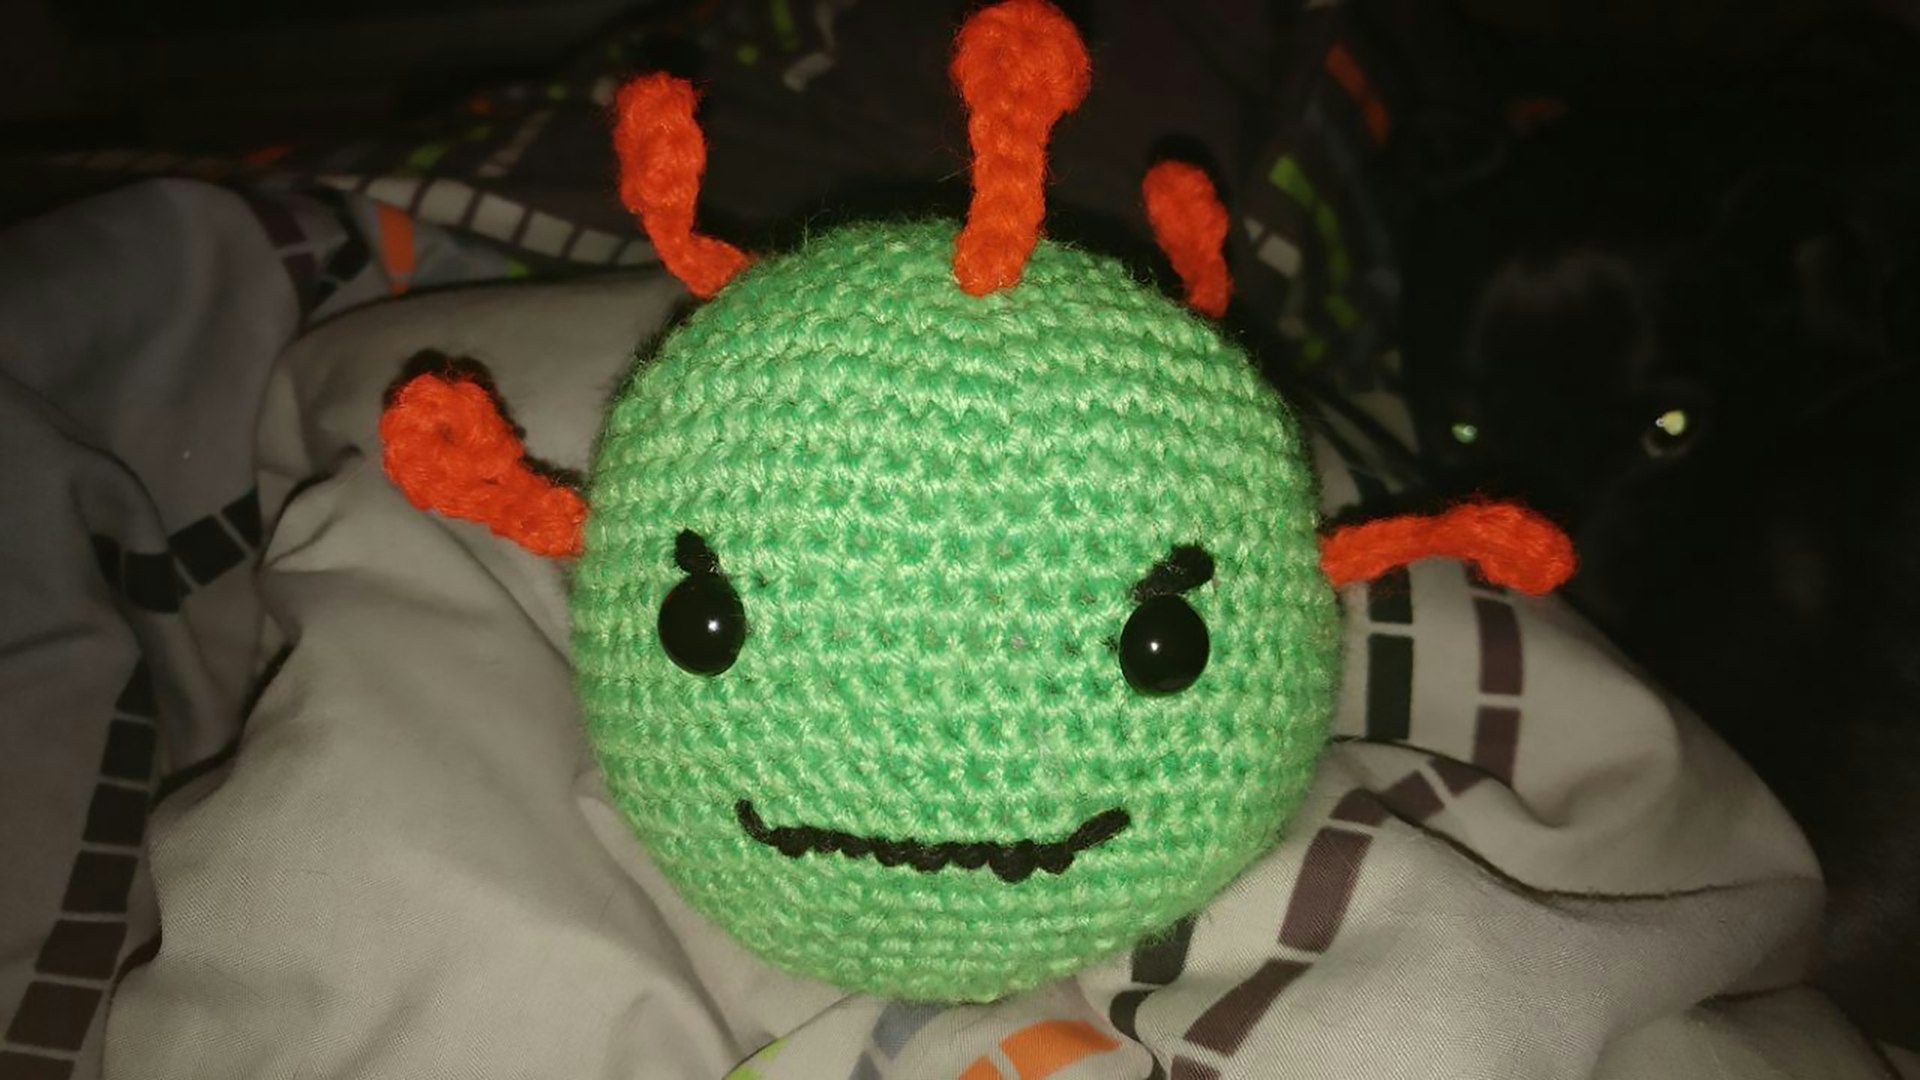 A picture of a crocheted plushie of a coronavirus molecule